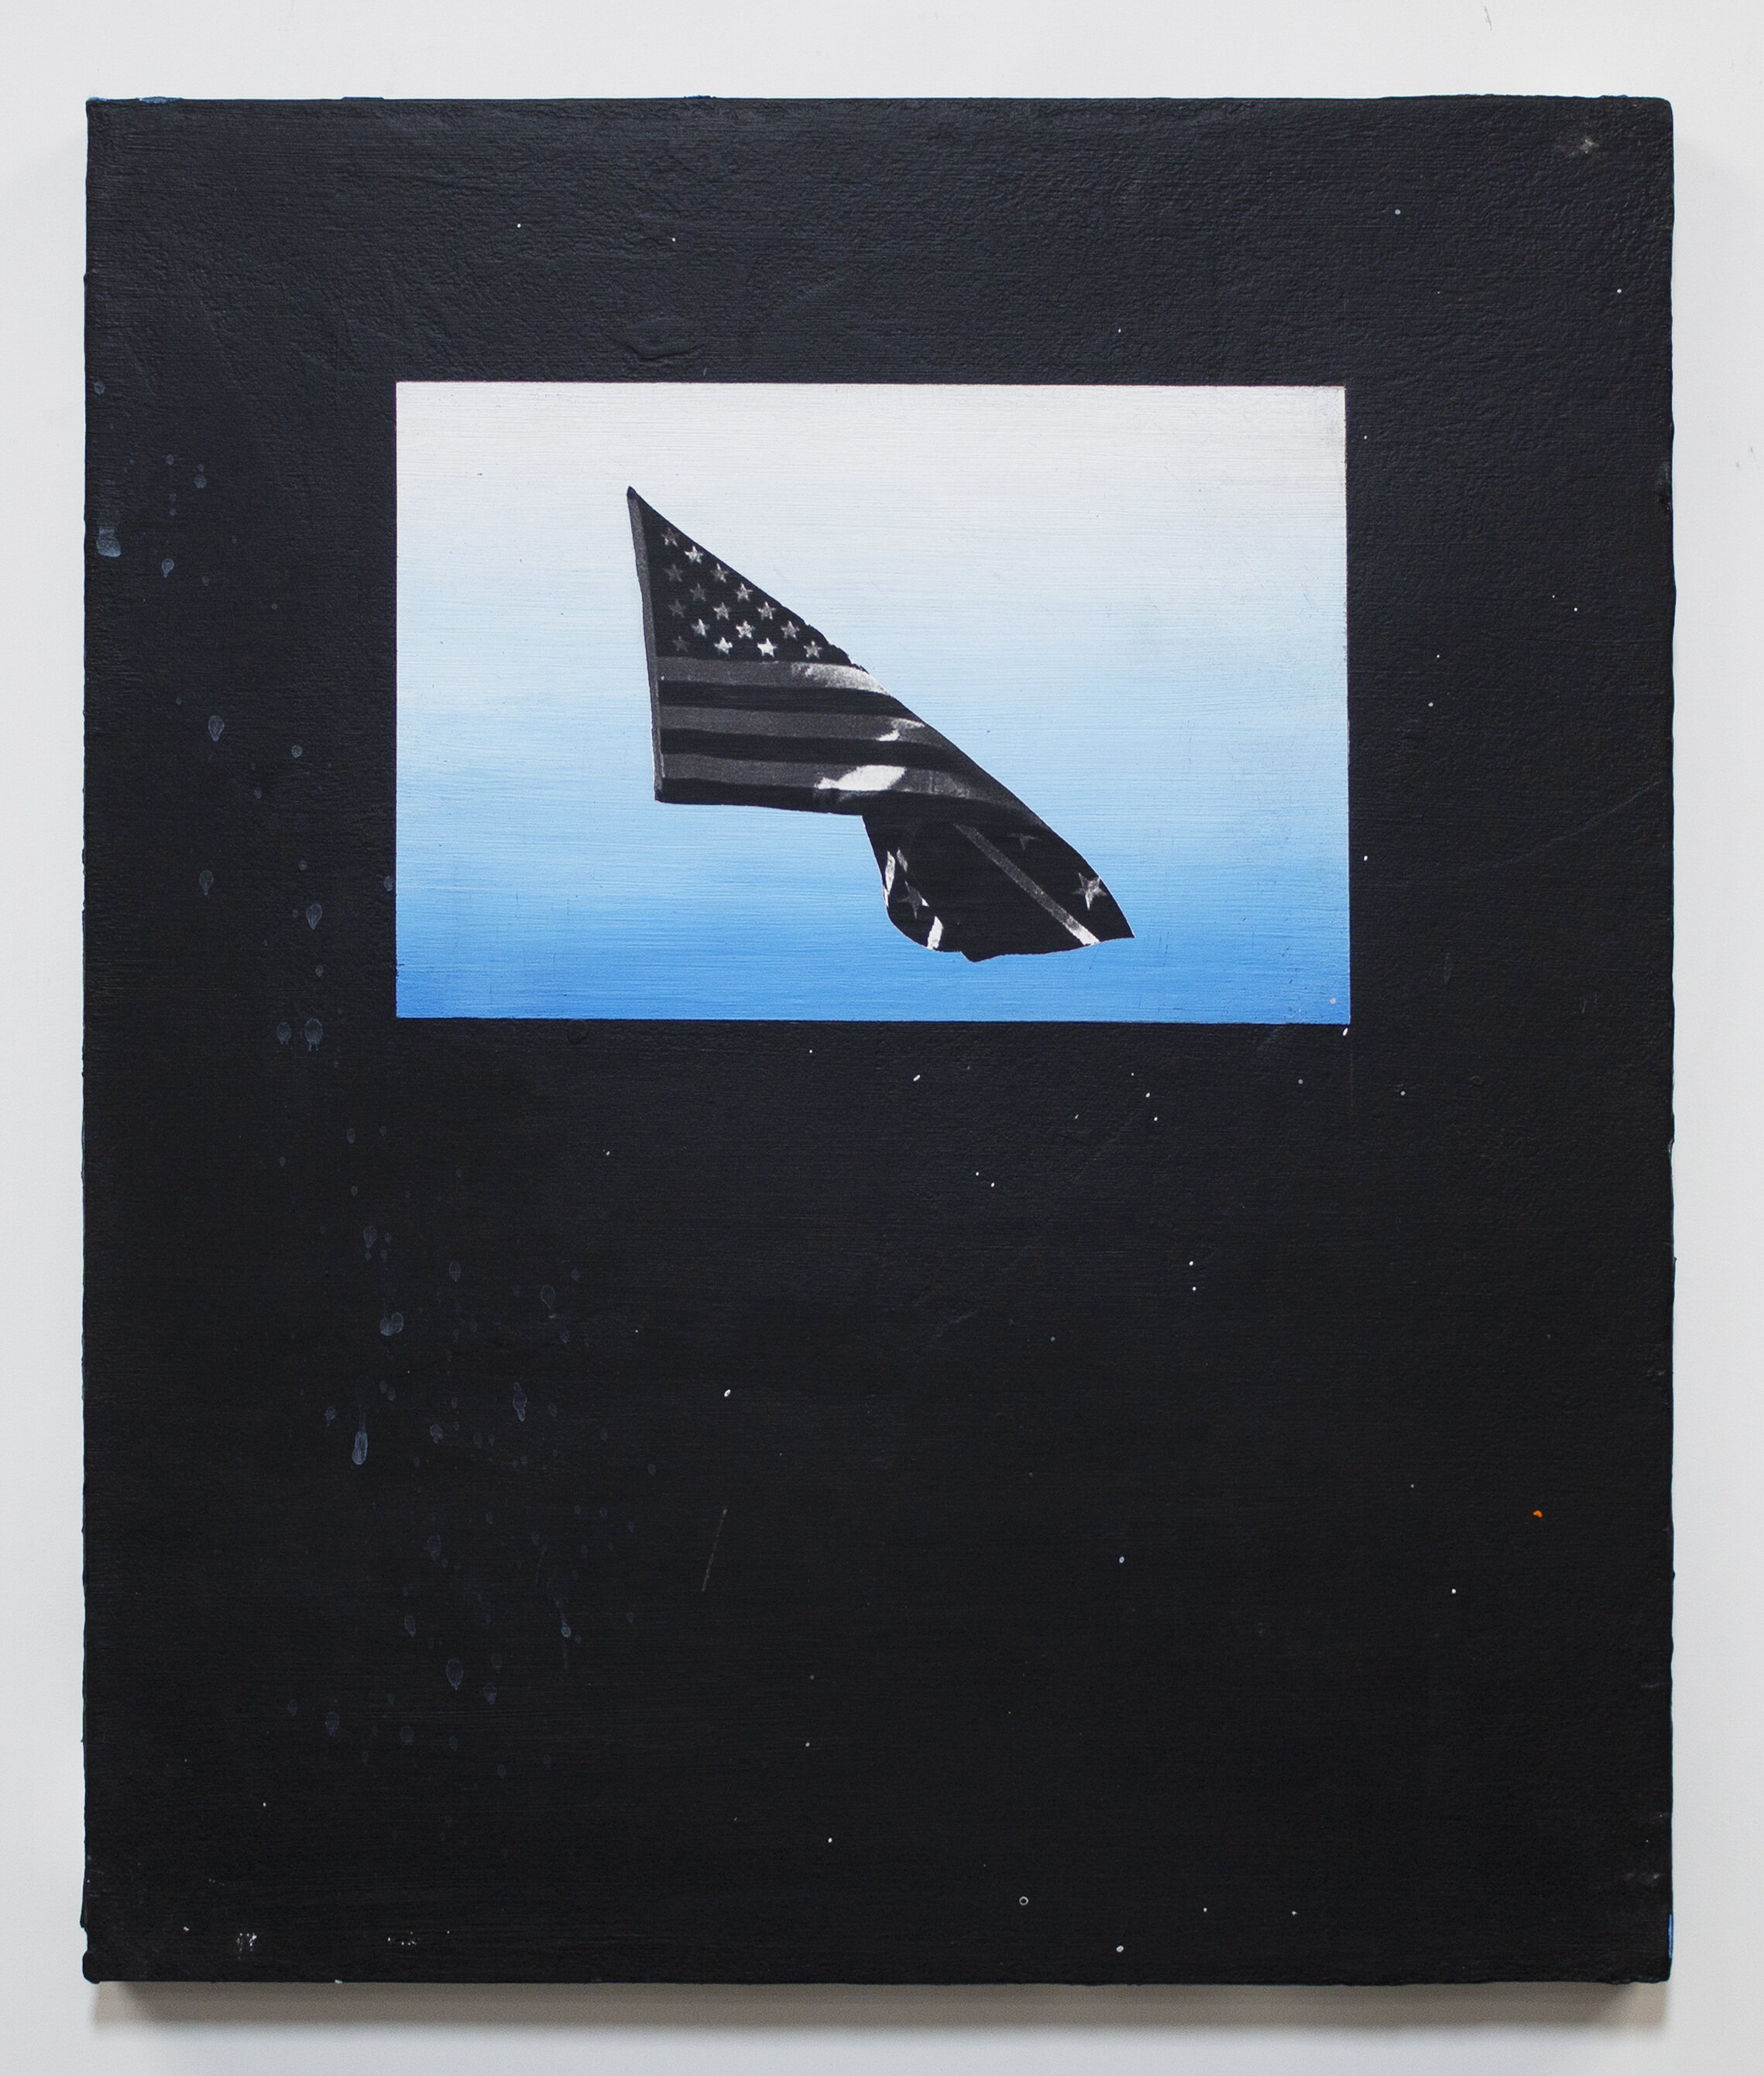  Home of the Brave  2019 / 24"x20"  Acrylic, Charcoal, Ink, and Digital Print on wood panel 